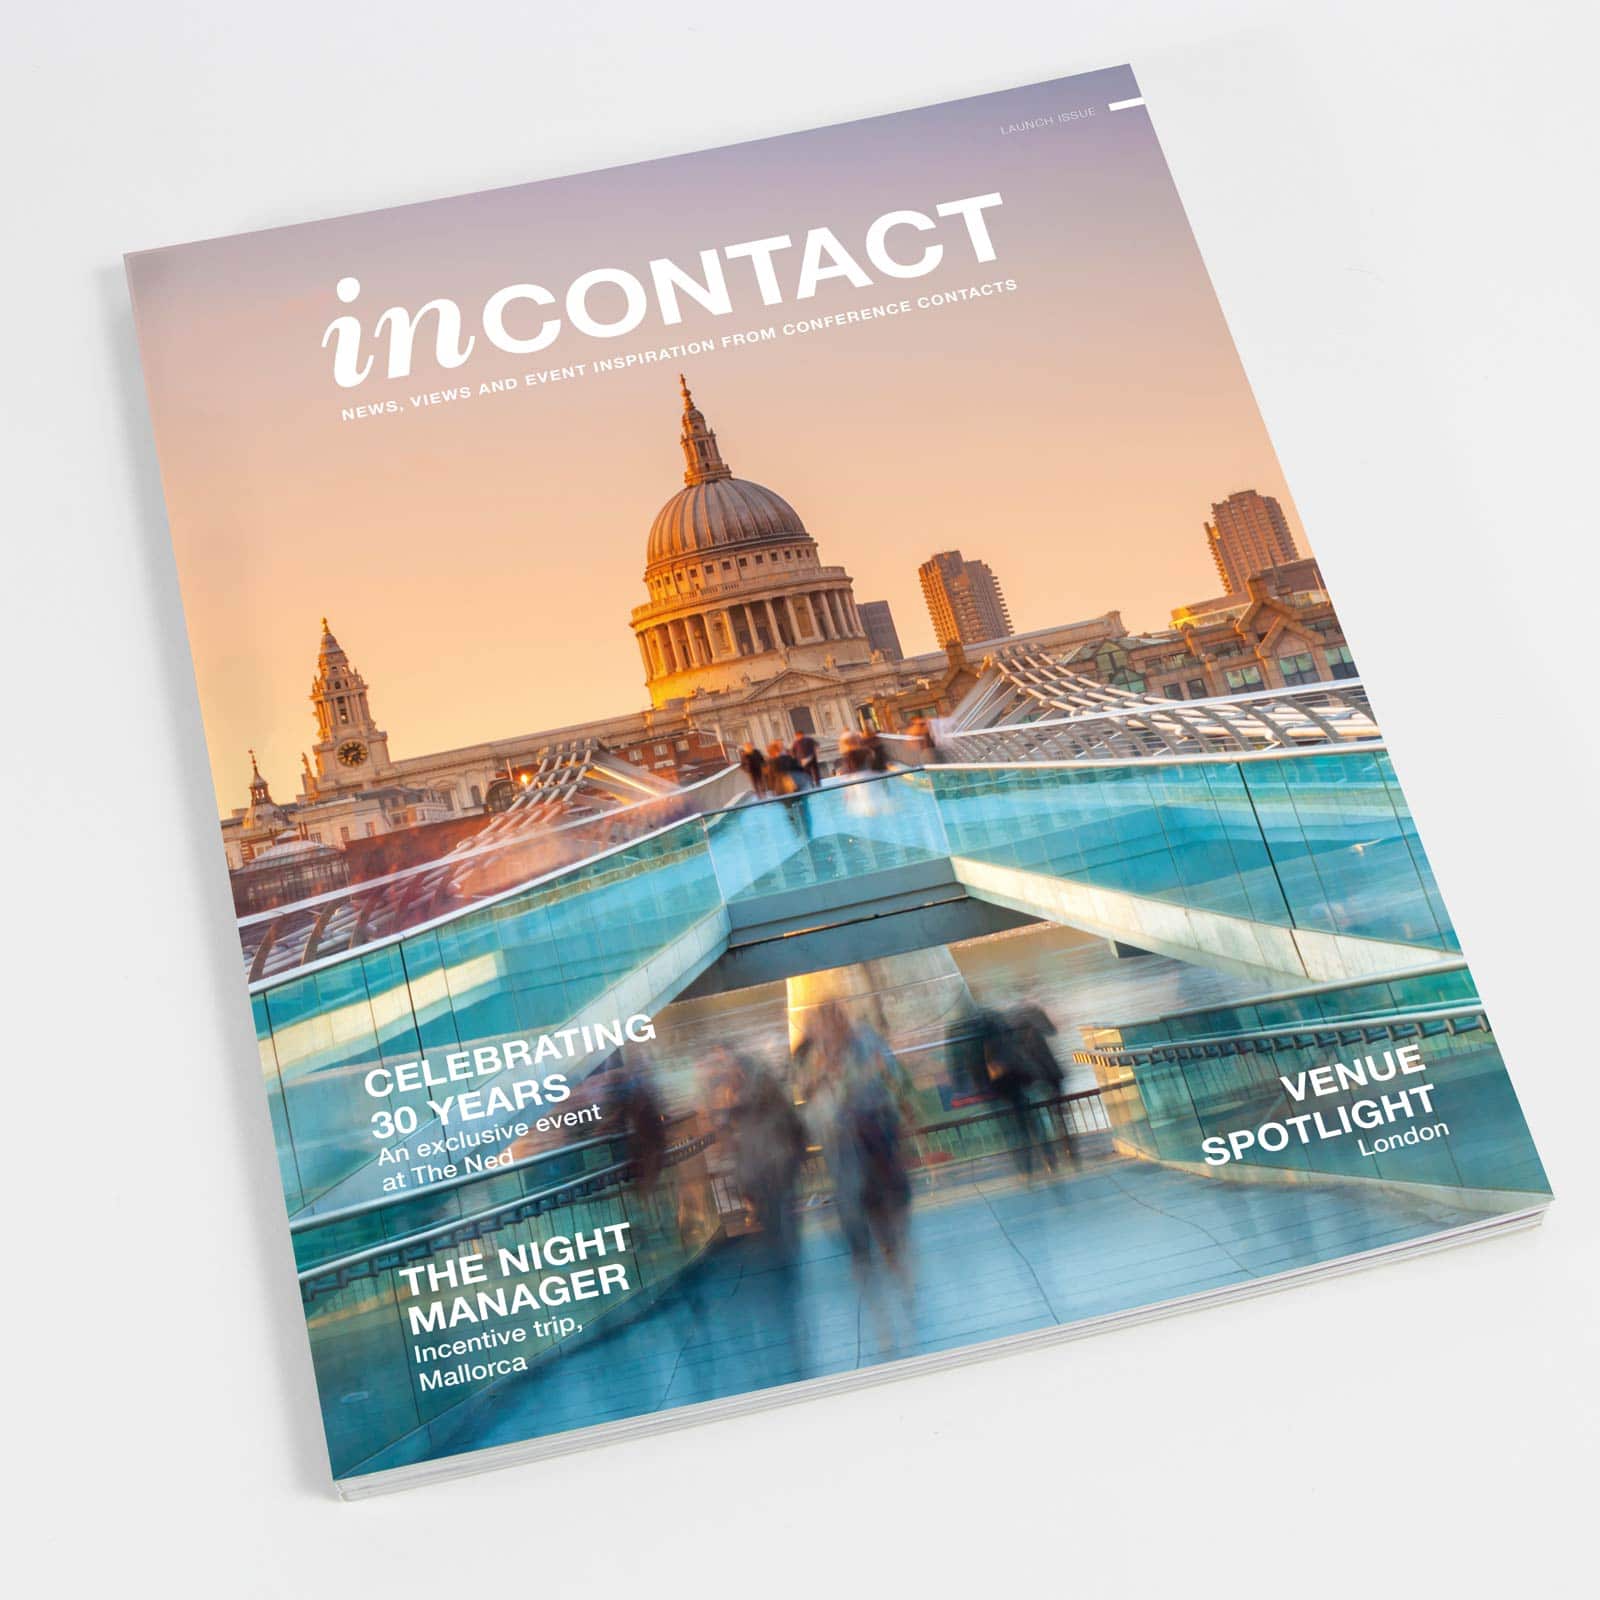 Conference-Contacts Corporate Magazine